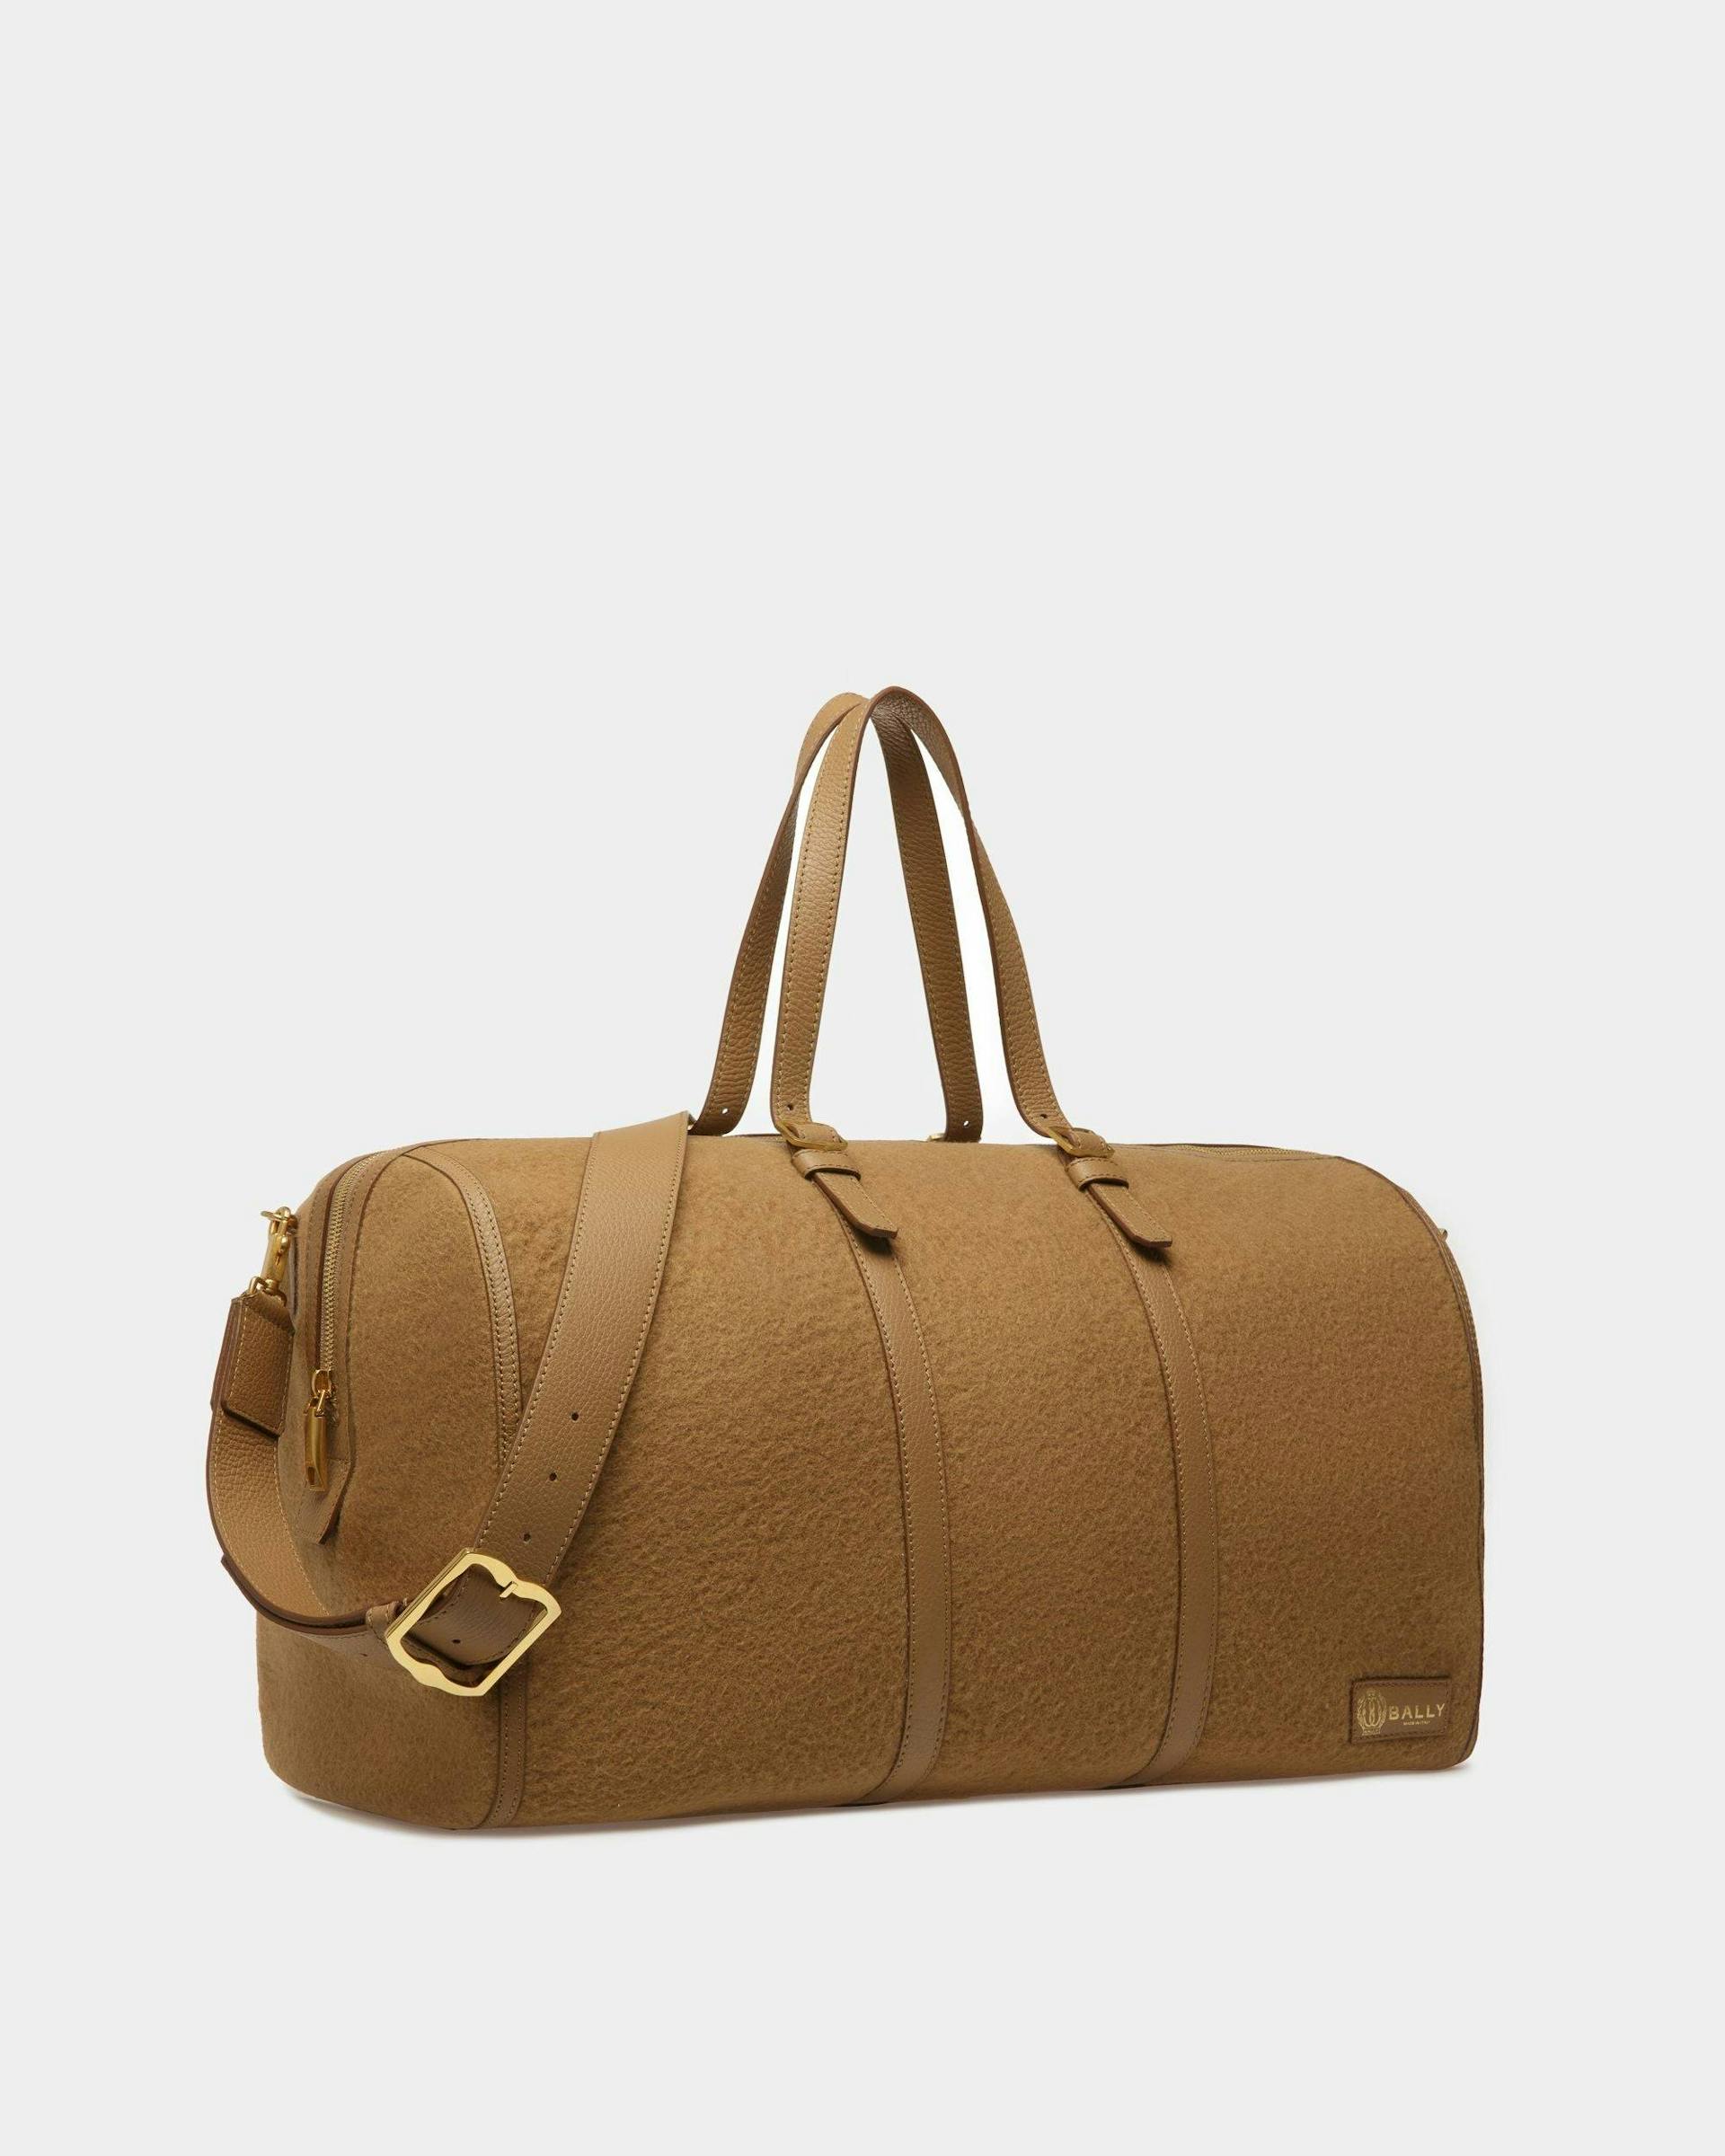 Gare Weekender In Camel Fabric And Leather - Men's - Bally - 03